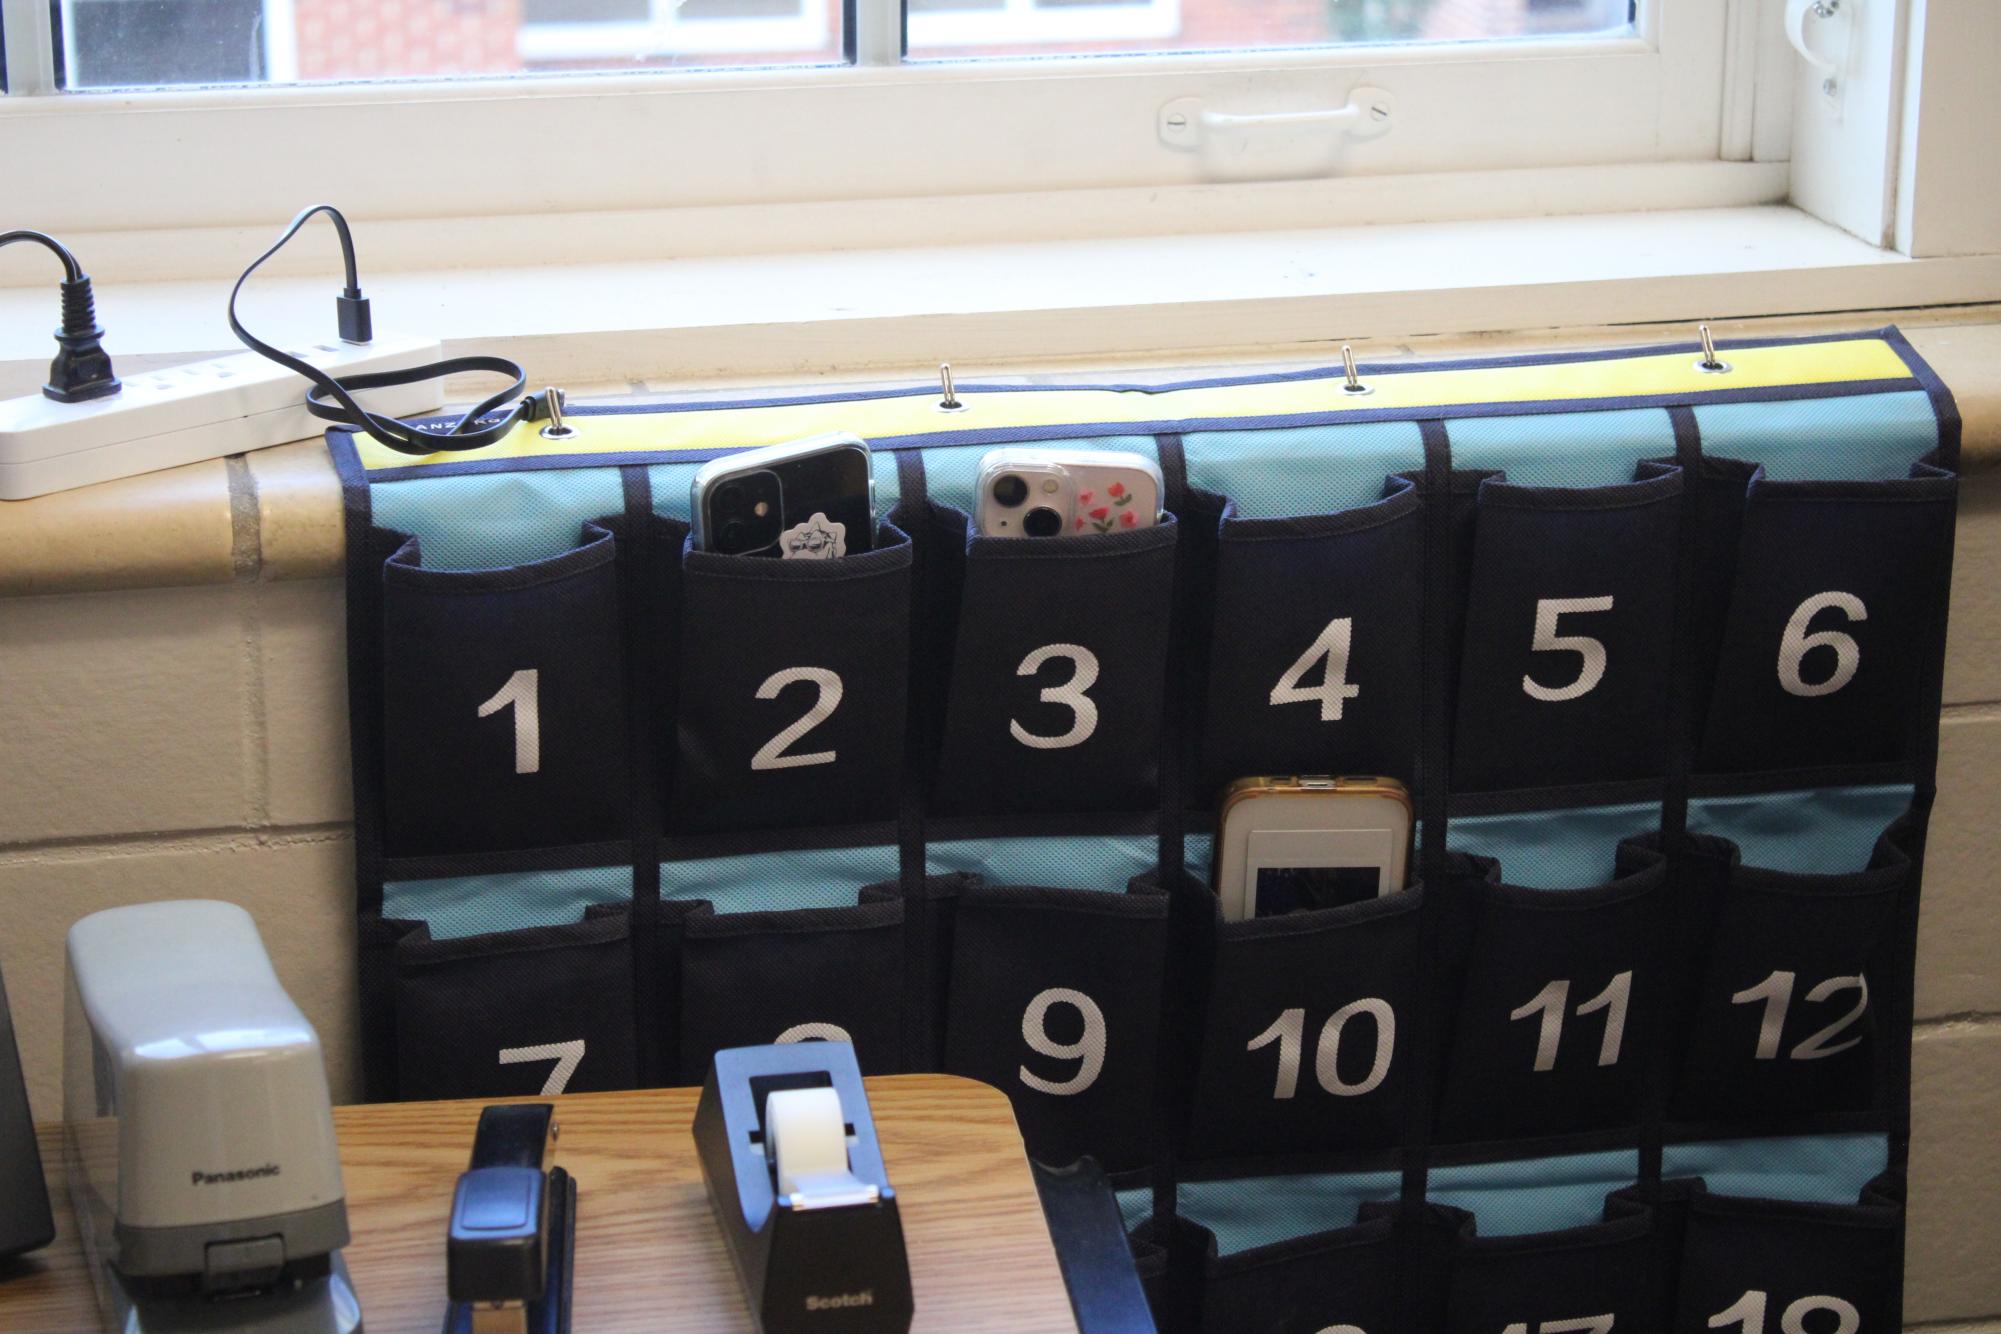 Every classroom has phone pockets for students to stow their phones